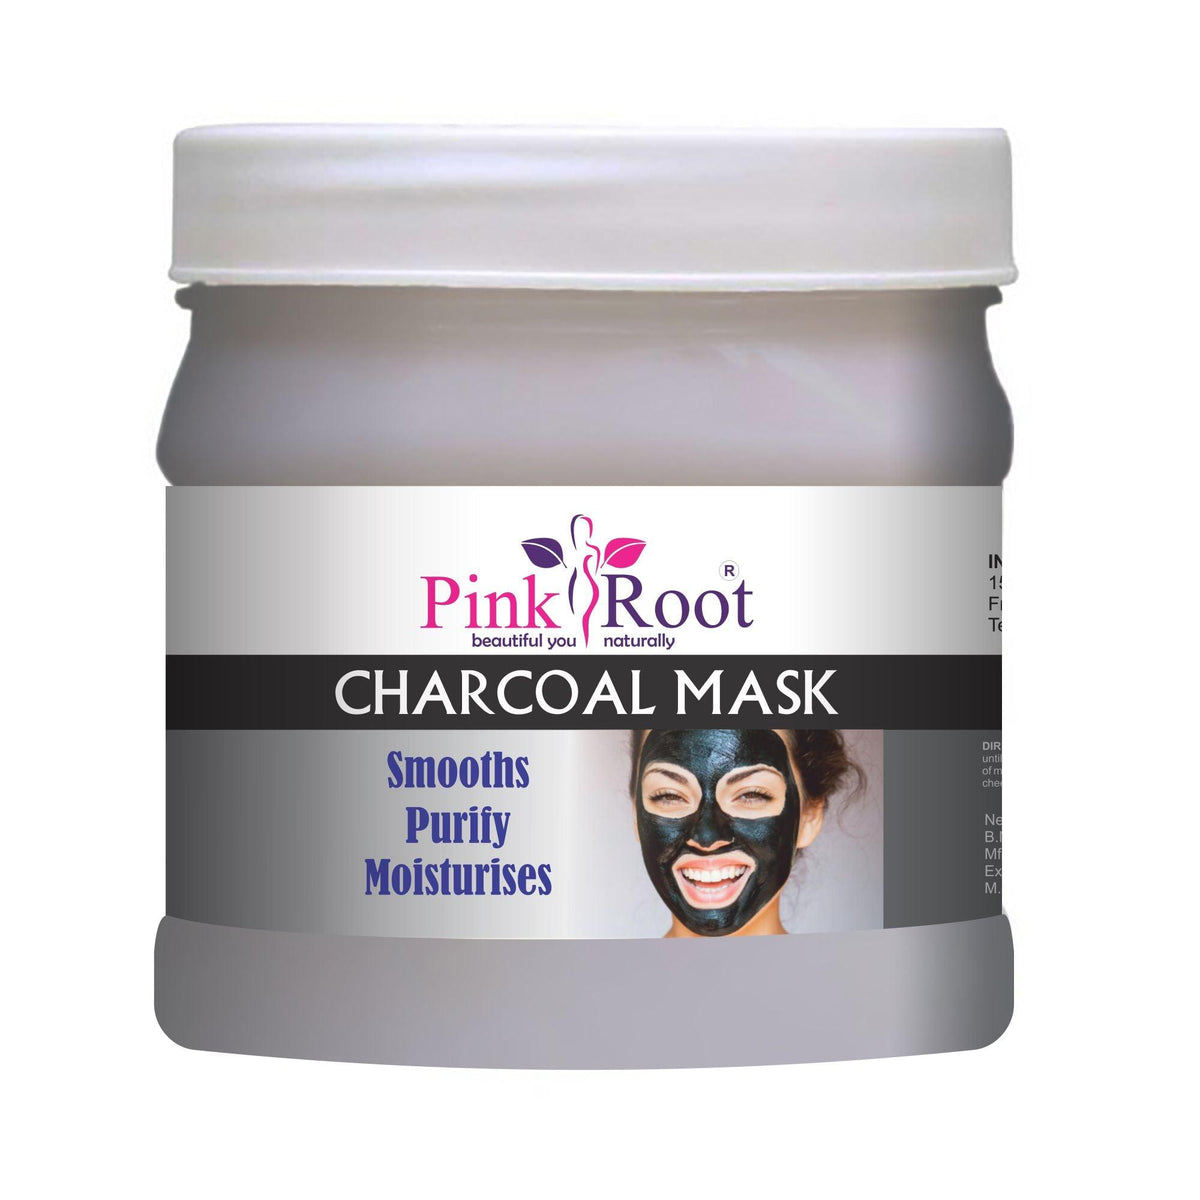 Charcoal Mask Smooths Purify Moisturises 500gm - Pink Root